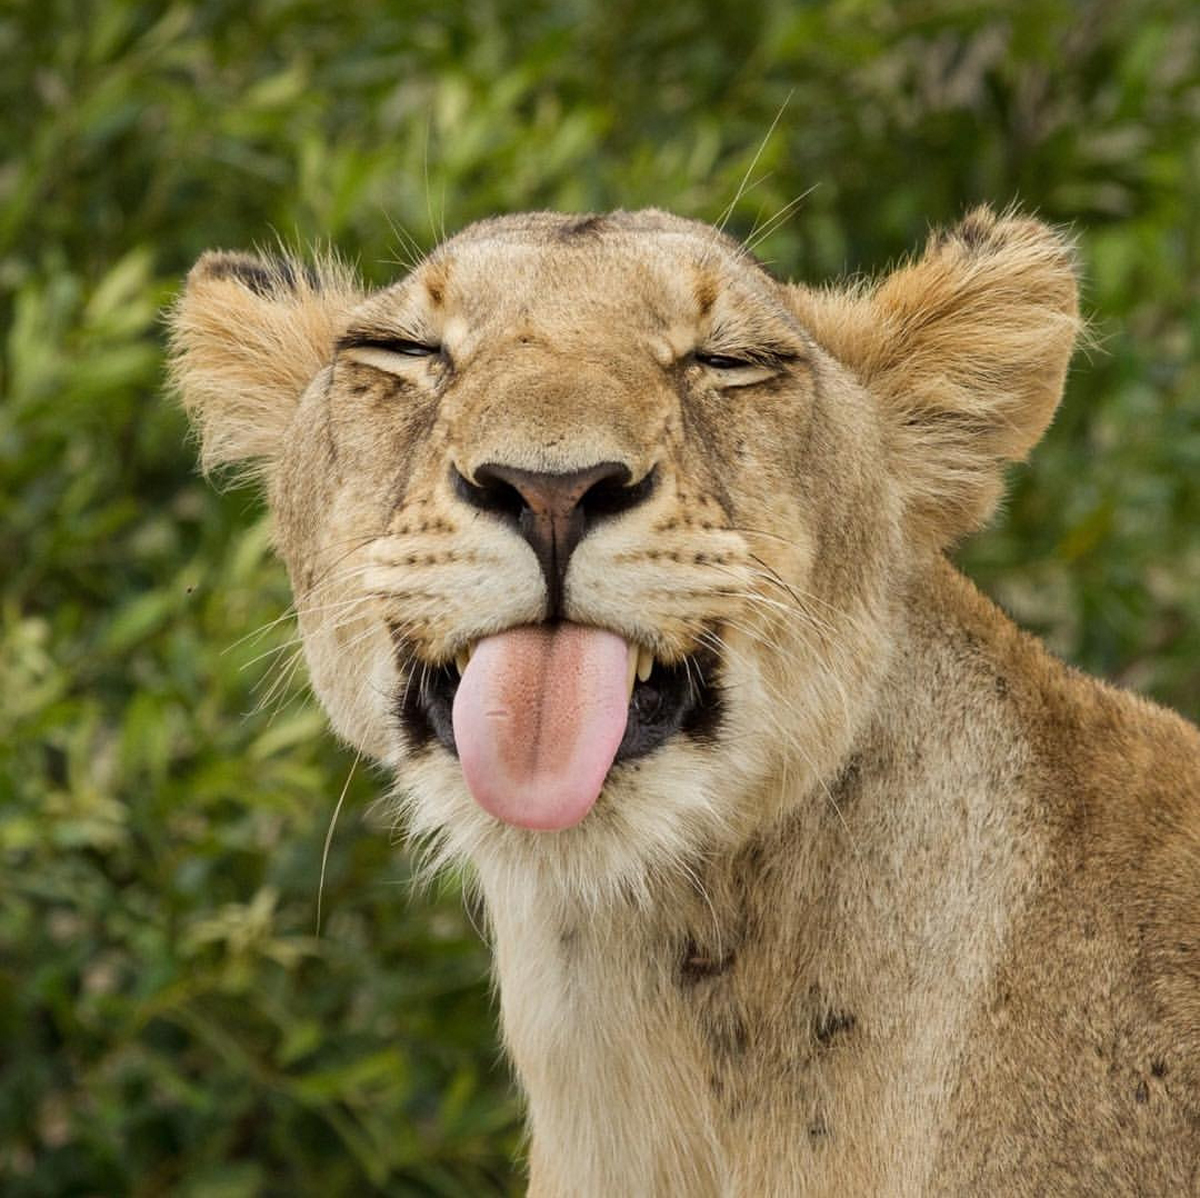 Lioness sticking out tongue © Nick du Plessis